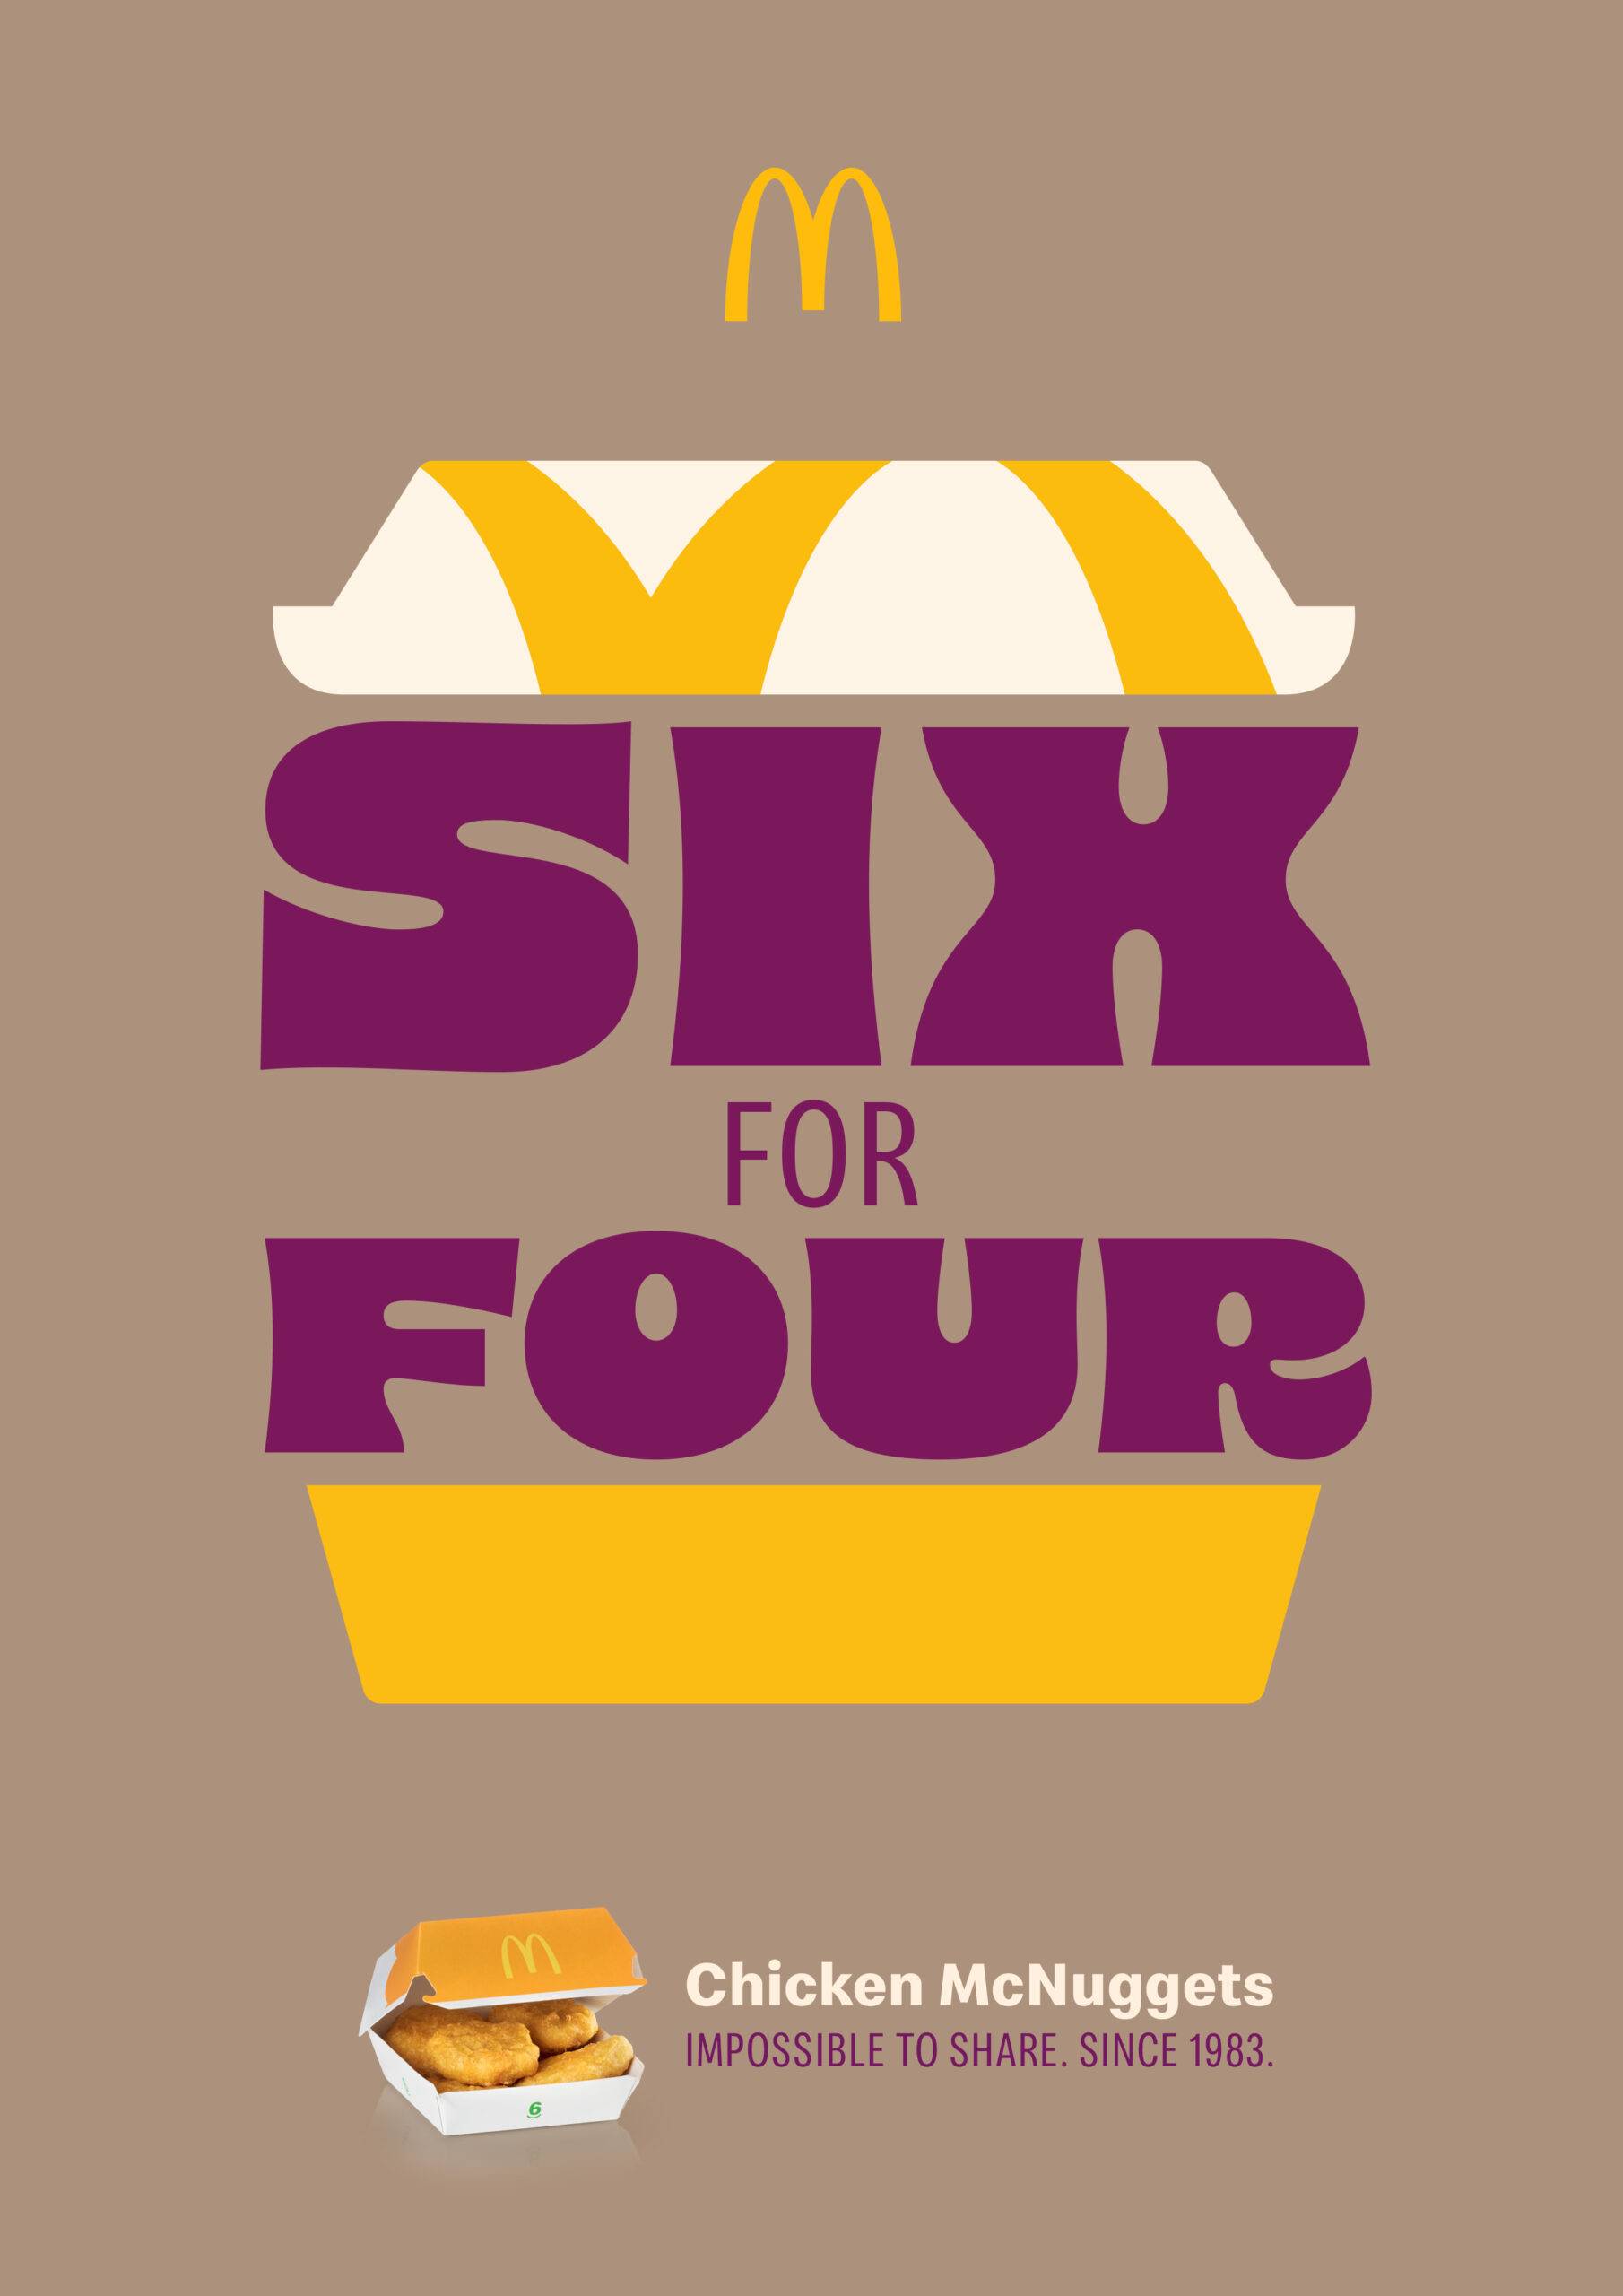 A poster of a McNuggets box that say "Six for Four: Chicken McNuggets, Impossible to share since 1983"